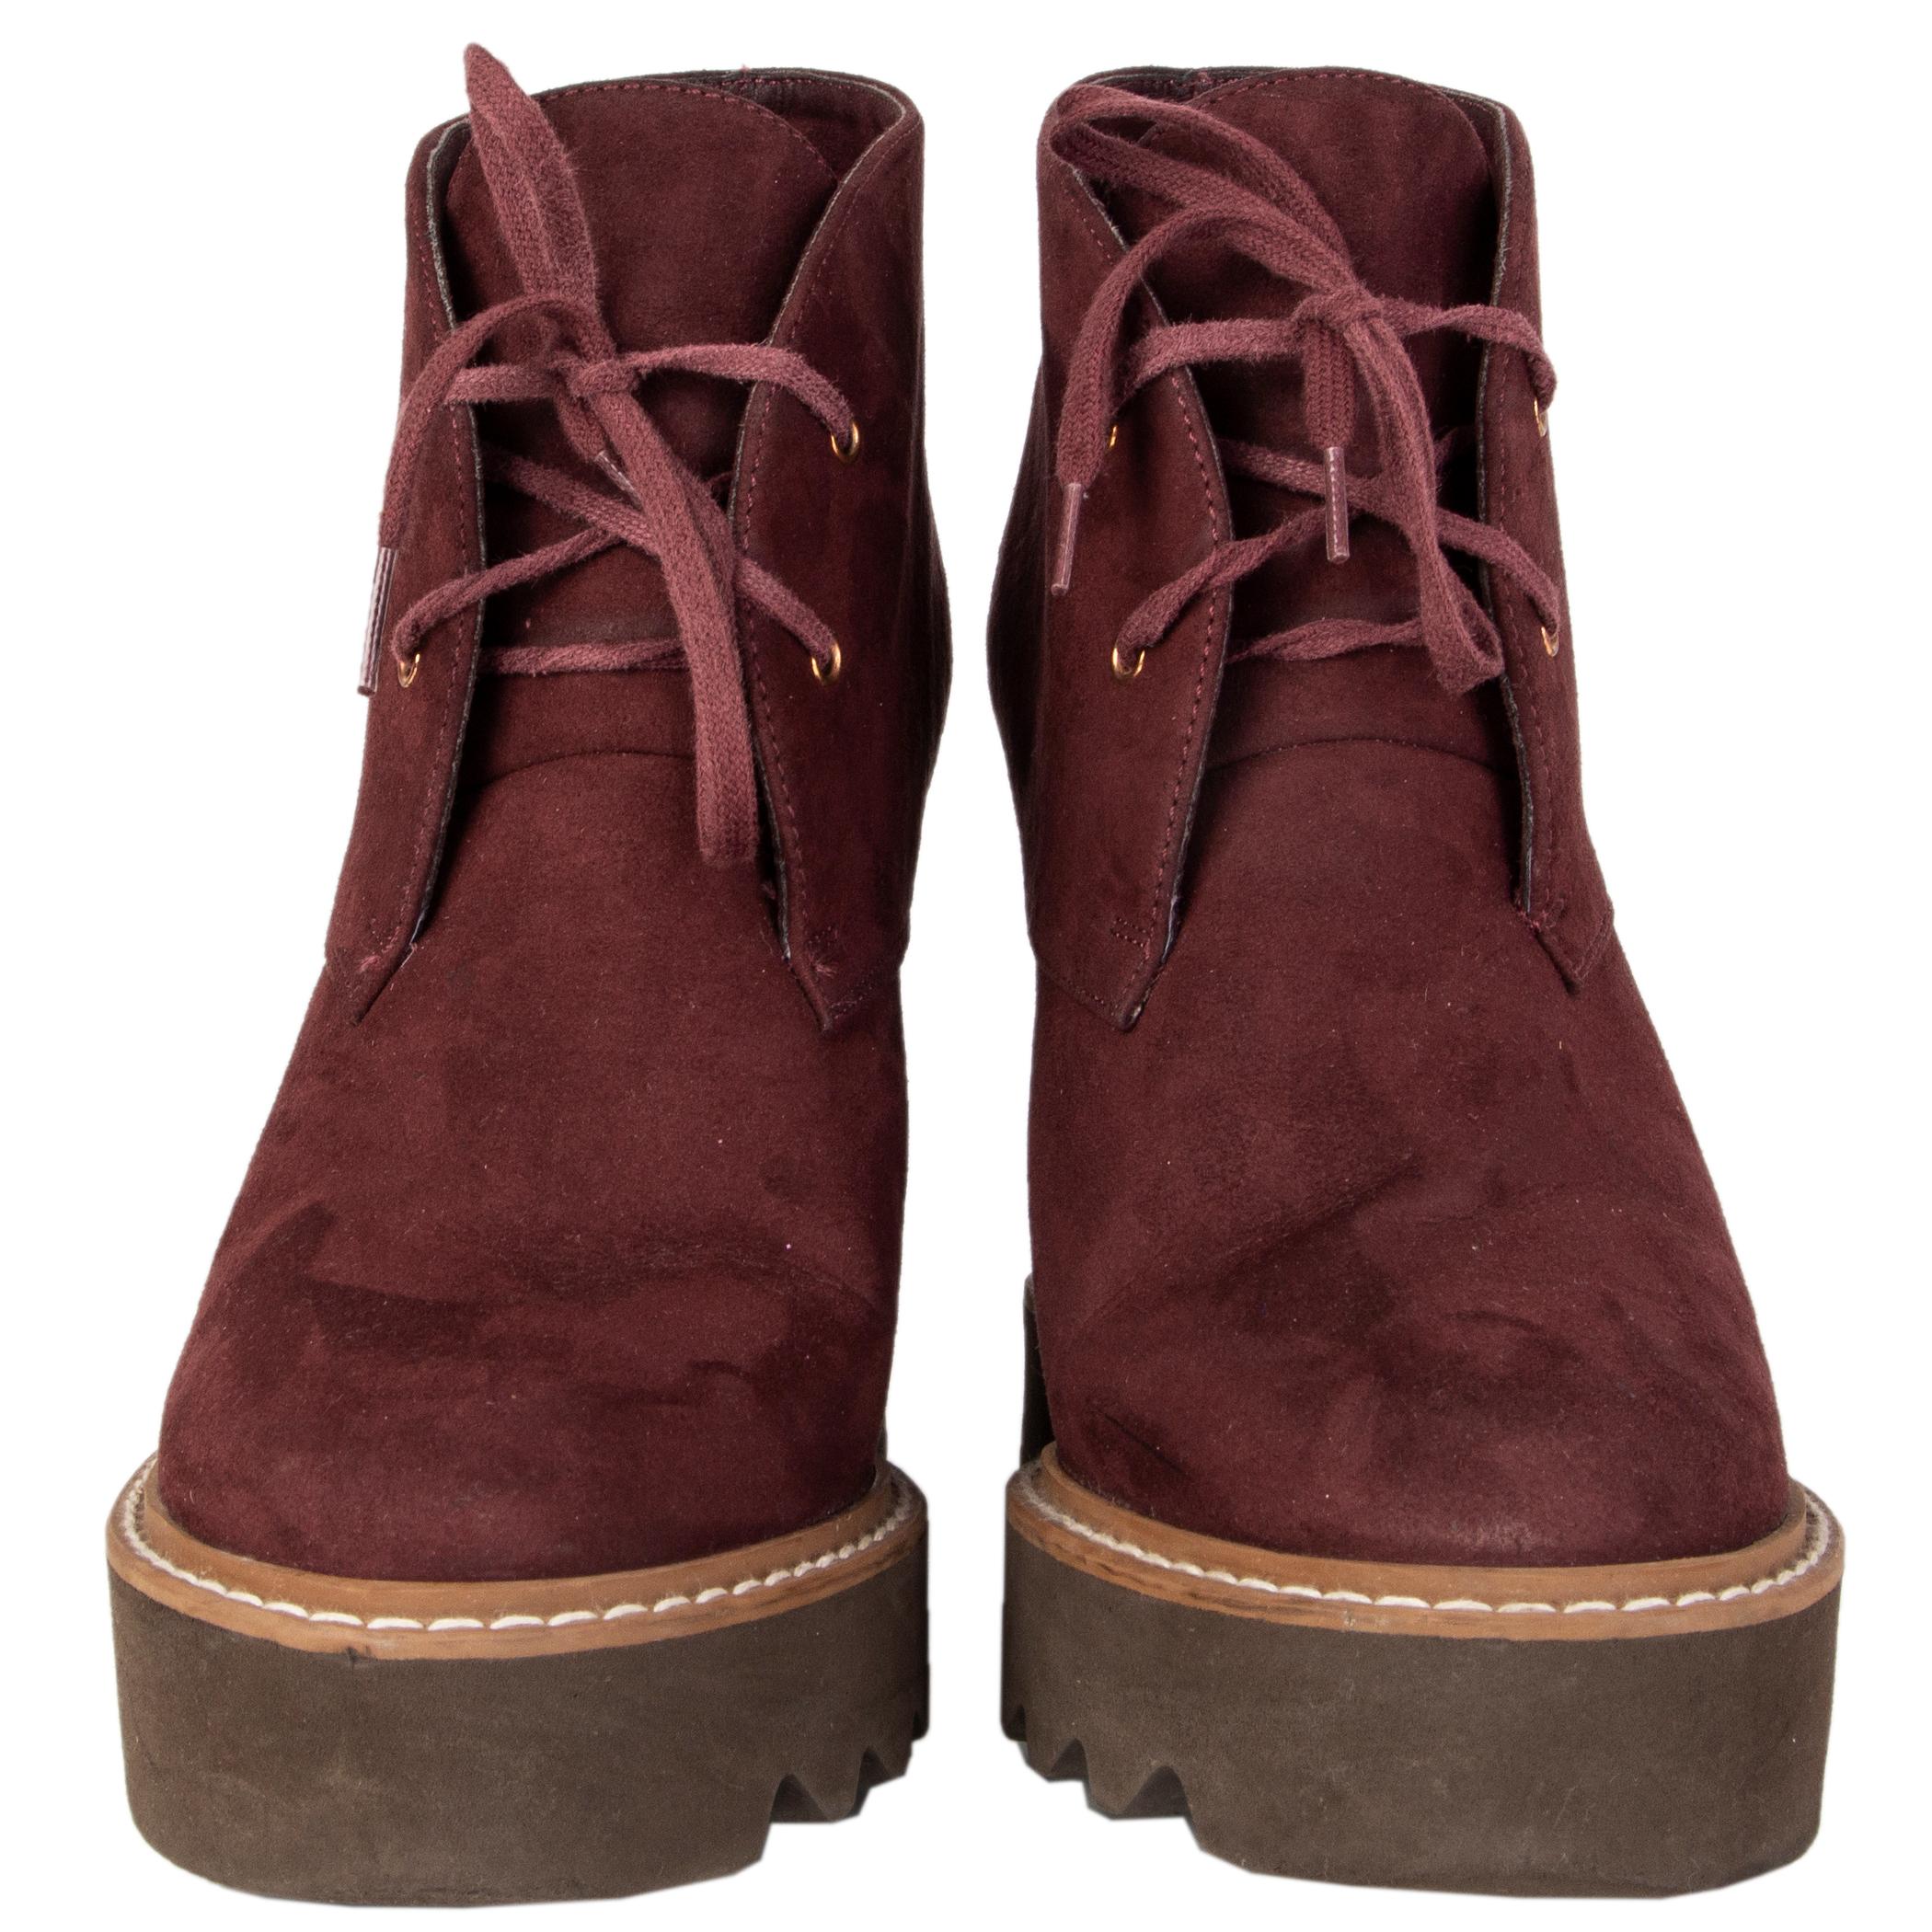 100% authentic Stella McCartney 'Leana' lace-up platform ankle boots in burgundy faux suede with a brown wooden wedge heel featuring a chunky brown rubber sole. Have been worn and are in excellent condition. 

Measurements
Imprinted Size	38
Shoe